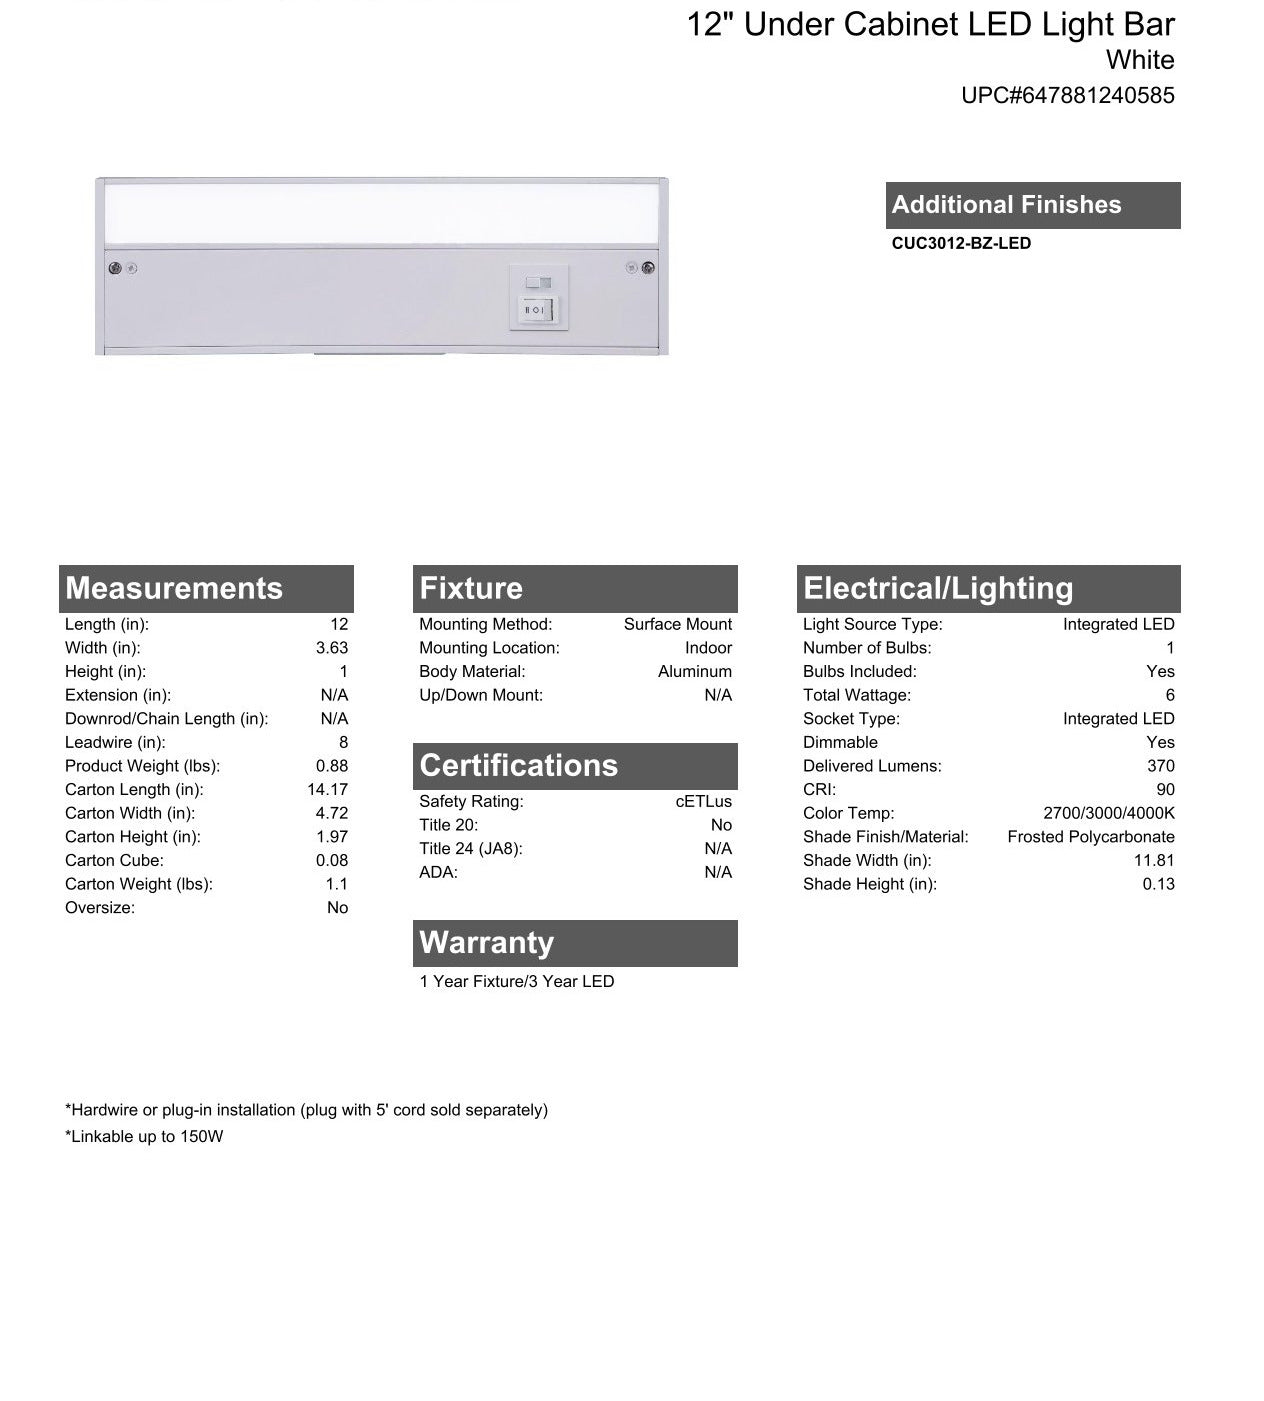 12" Under Cabinet LED Light Bar in White (3-in-1 Adjustable Color Temperature)